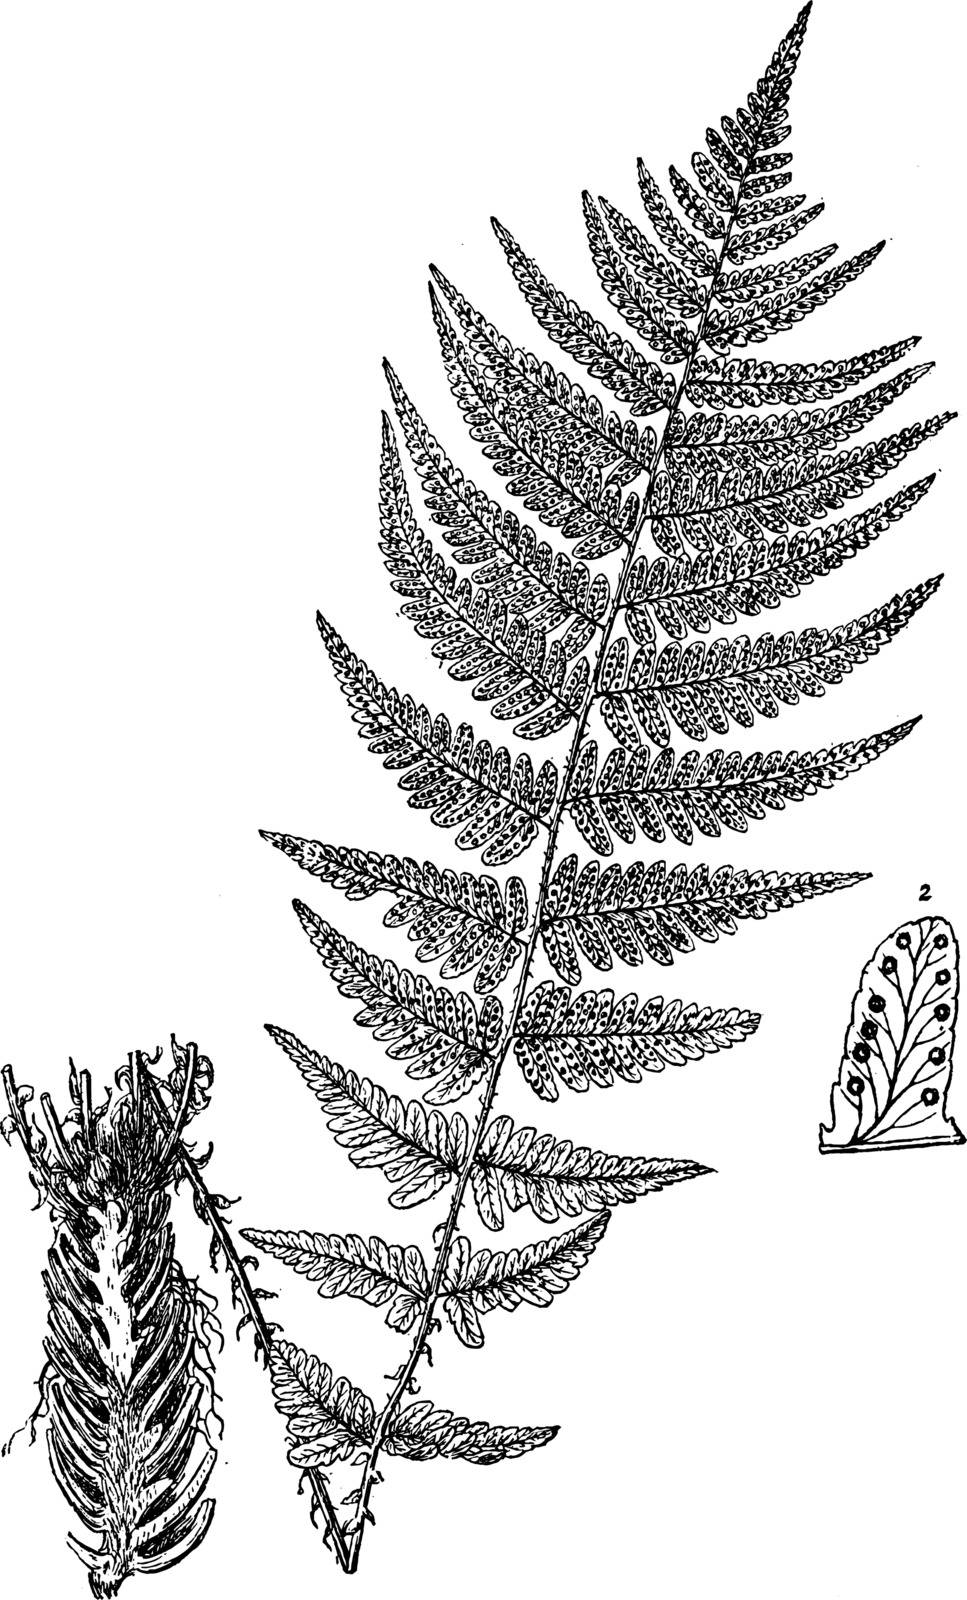 This is Fern Hybrid along with Vascular roots. It looks like a neem tree and leaves are like neem-tree-leaf. This is non-flowering plants and leaf contains the small pores, vintage line drawing or engraving illustration.